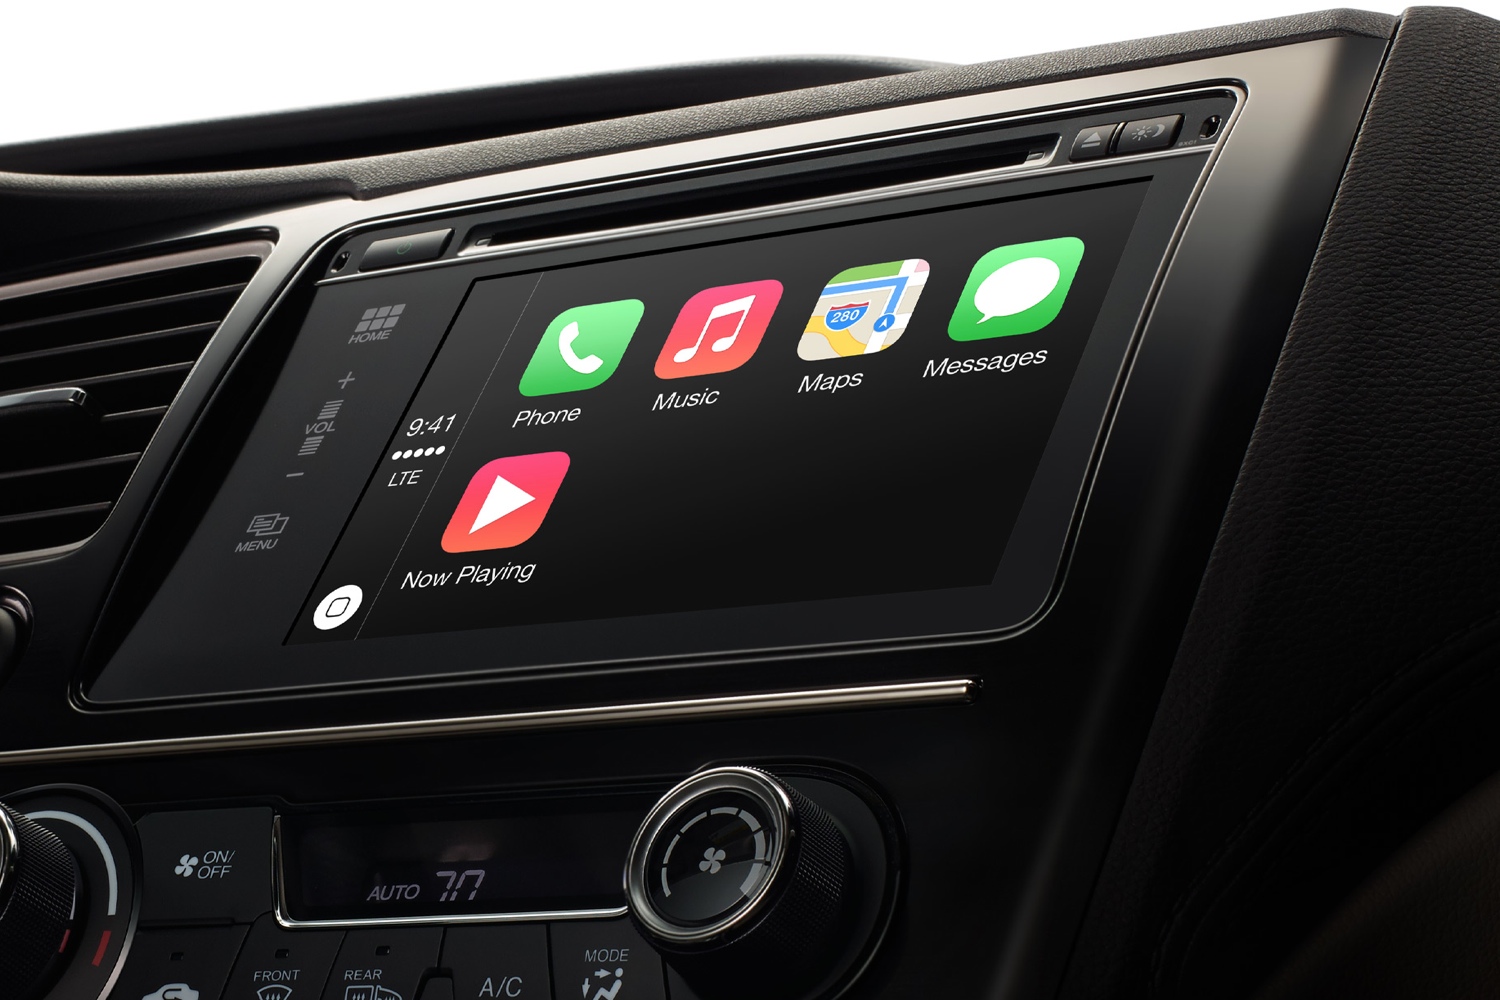 Apple's CarPlay interface offers simplified iPhone apps that can be used while driving. (Apple)